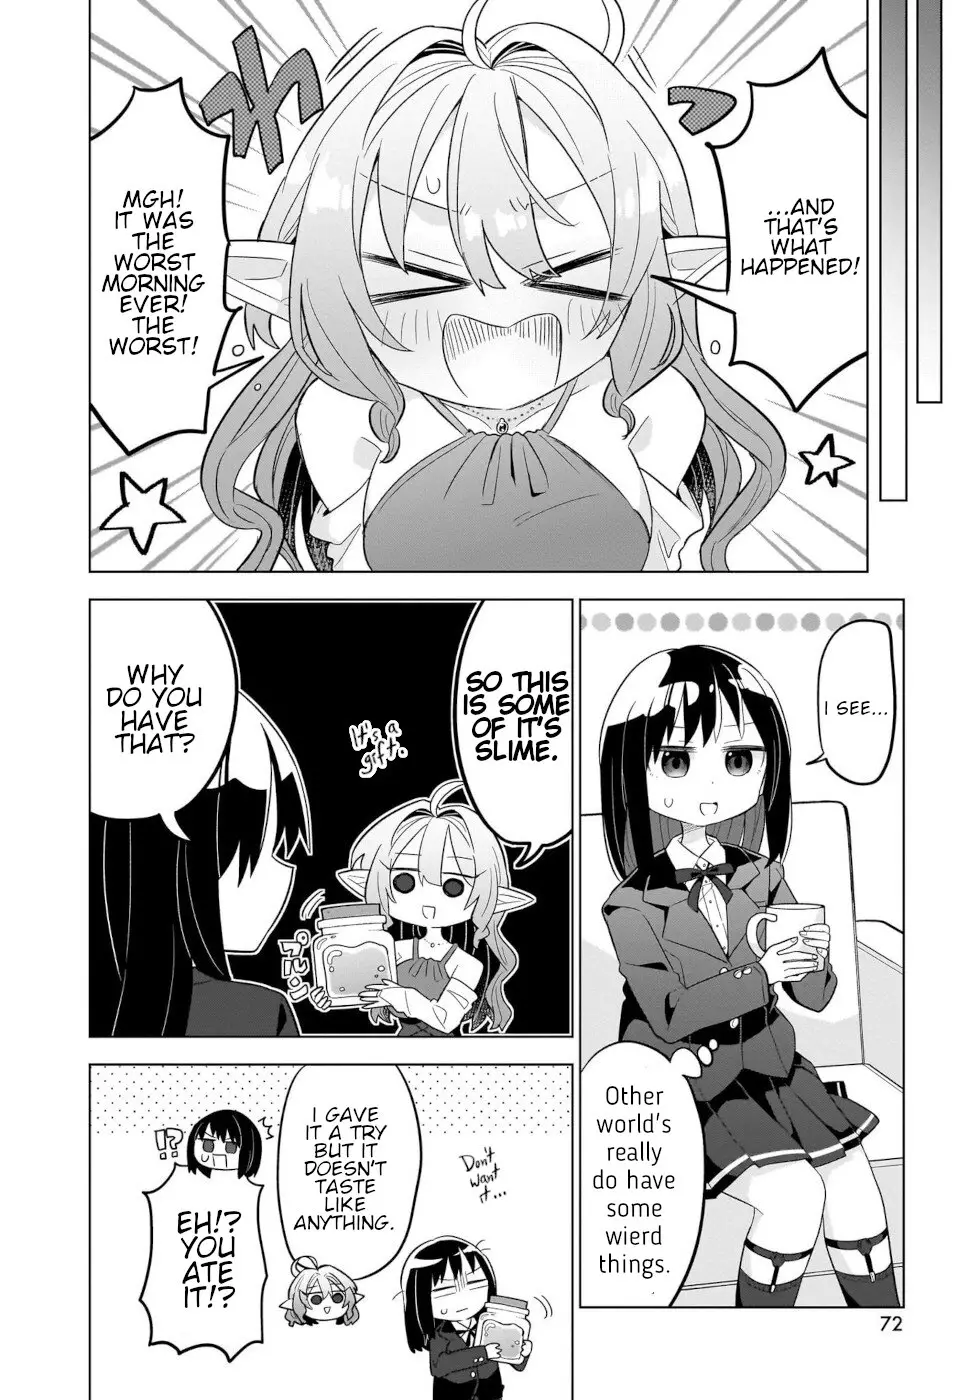 Sweets, Elf, And A High School Girl - 3 page 6-06d79644